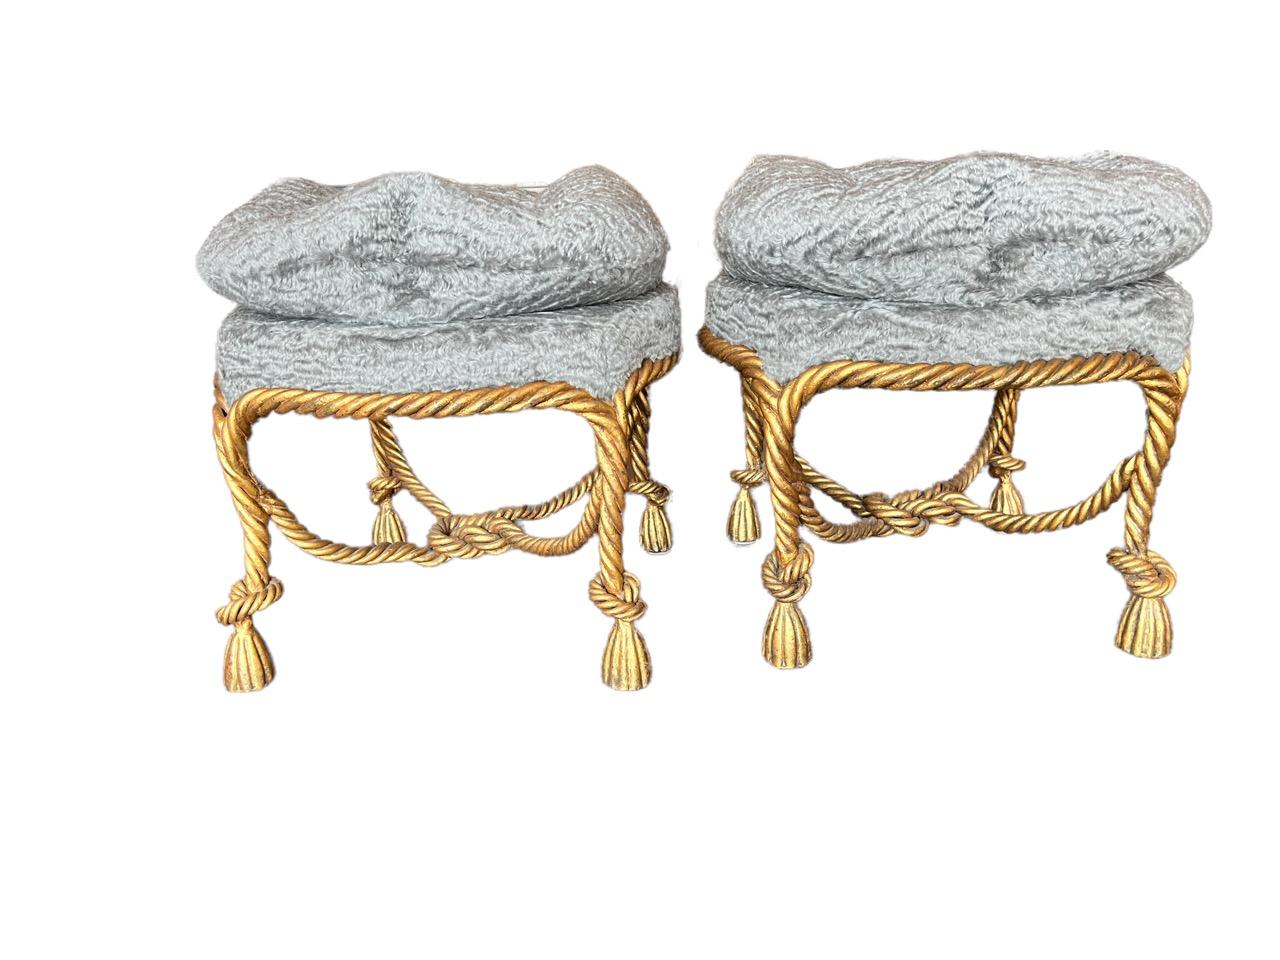 Pair of Early 20th Century Italian Gilt Gold Metal Rope Stools In Fair Condition For Sale In North Miami, FL